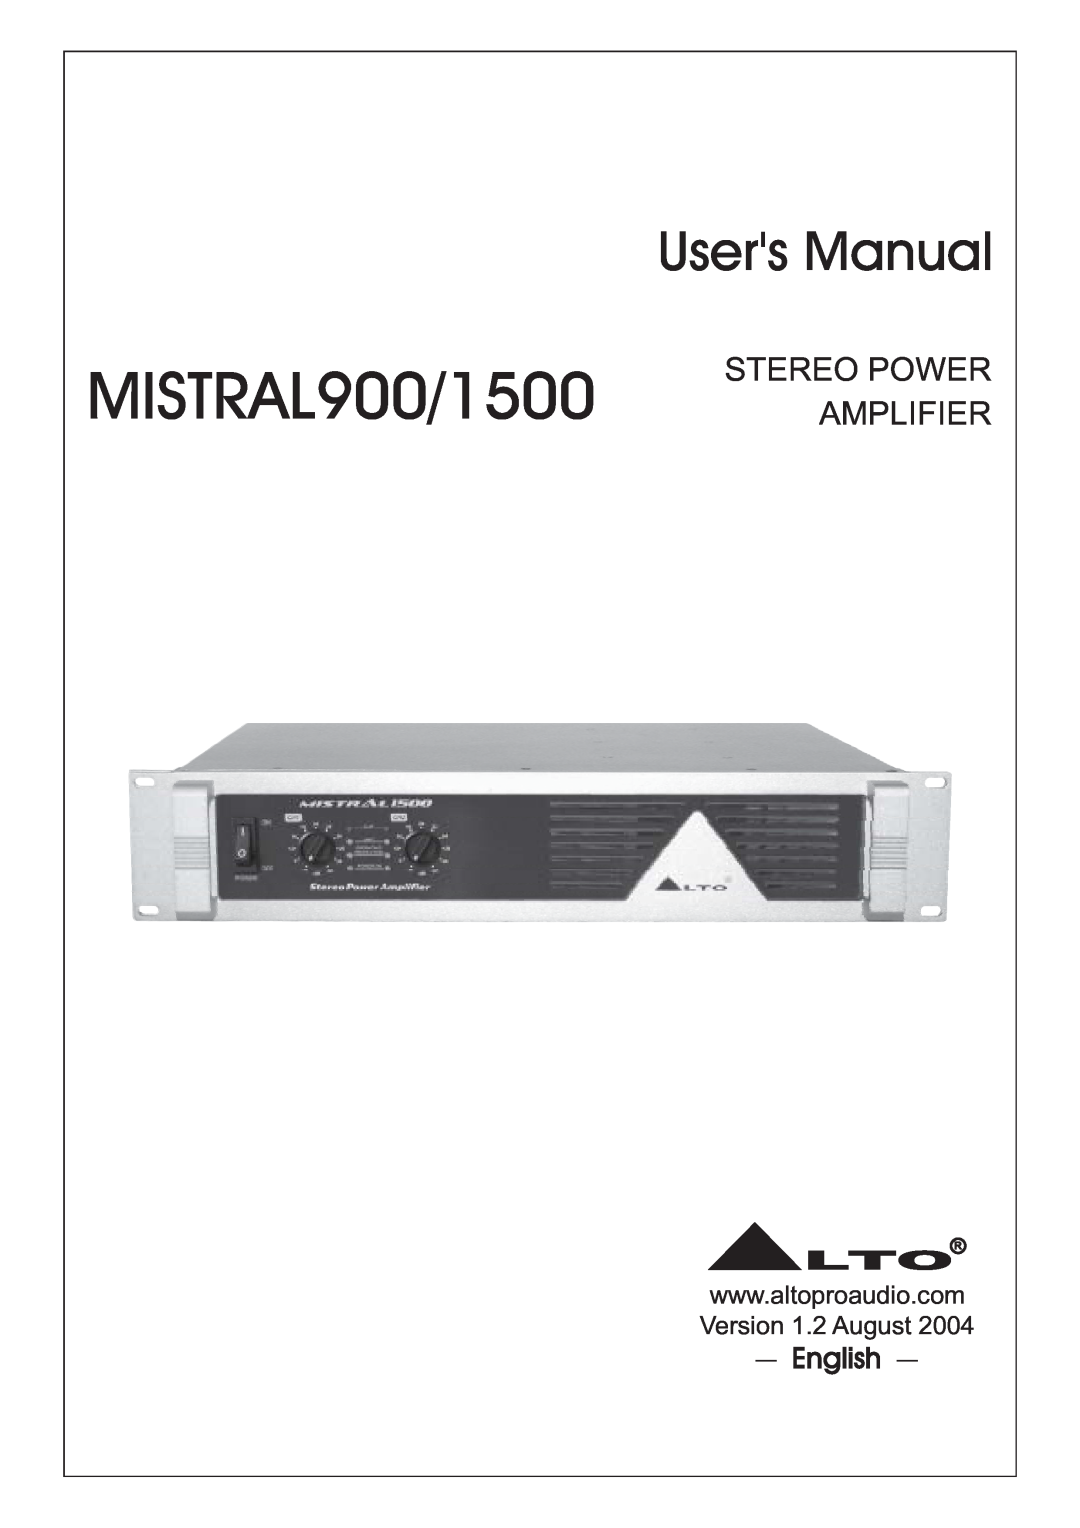 Mistral user manual MISTRAL900/1500 AMPLIFIER, Stereo Power, English 